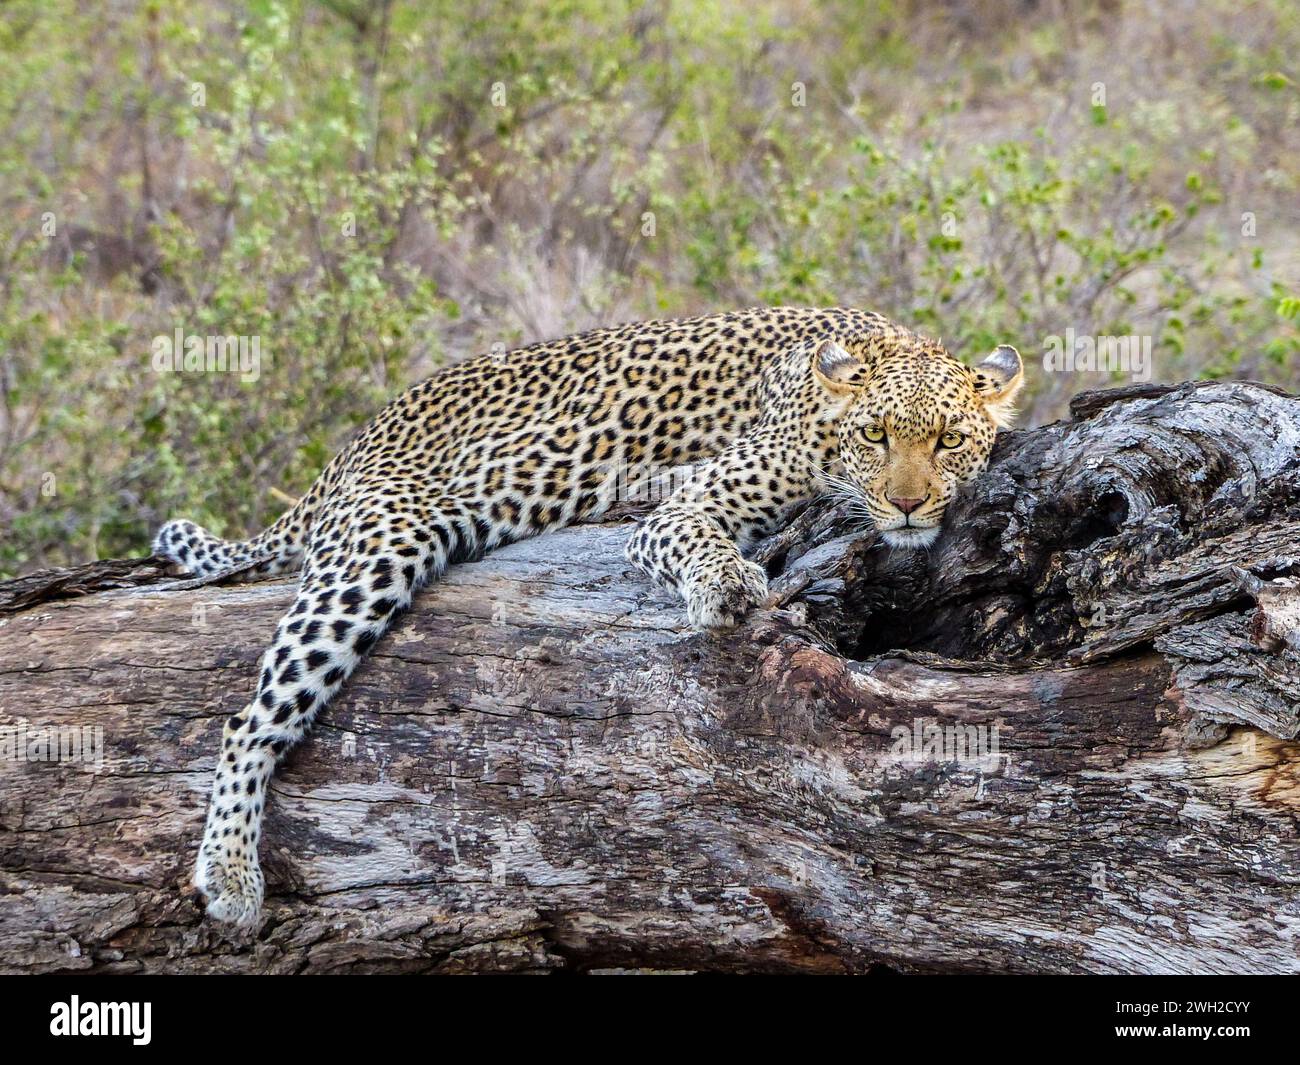 Leopard relaxing laying down on a tree trunk, South Africa Stock Photo